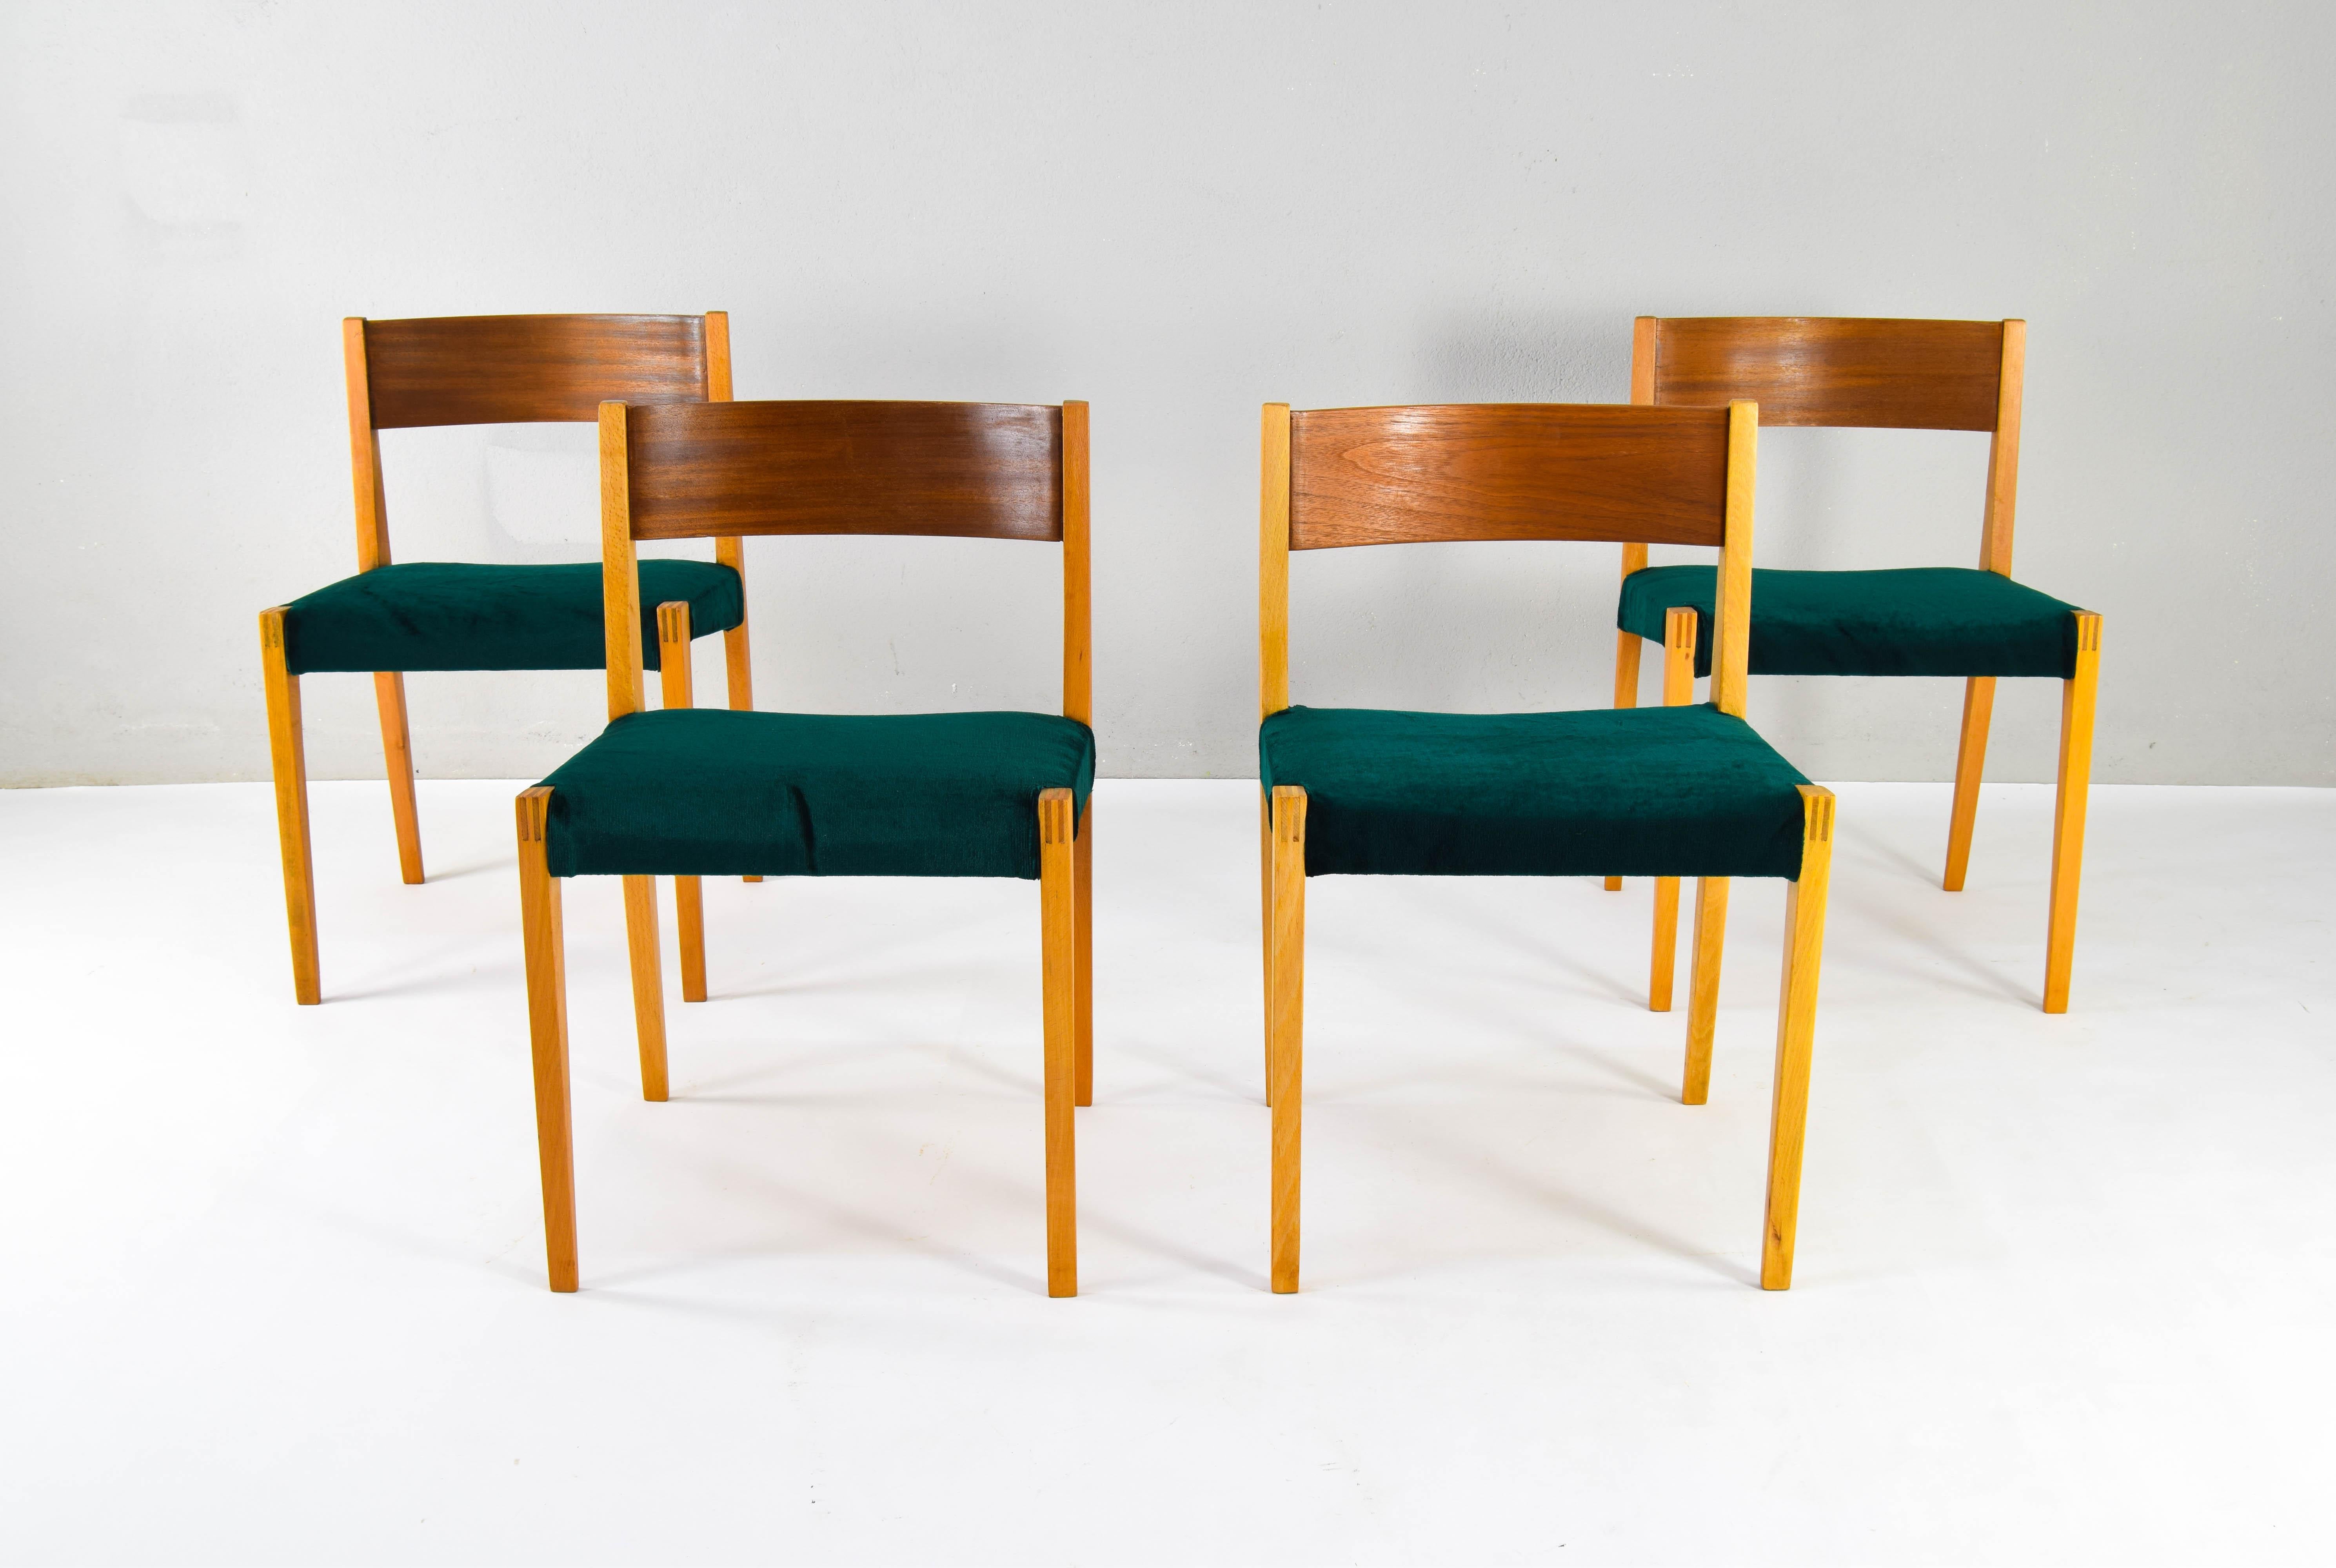 Exceptional and very rare Pia chairs.
This set of four chairs has the peculiarity of having its backrest made of teak and its legs made of beech.
They could perhaps be an old prototype.
Upholstered in a beautiful green velvet.
They are in good